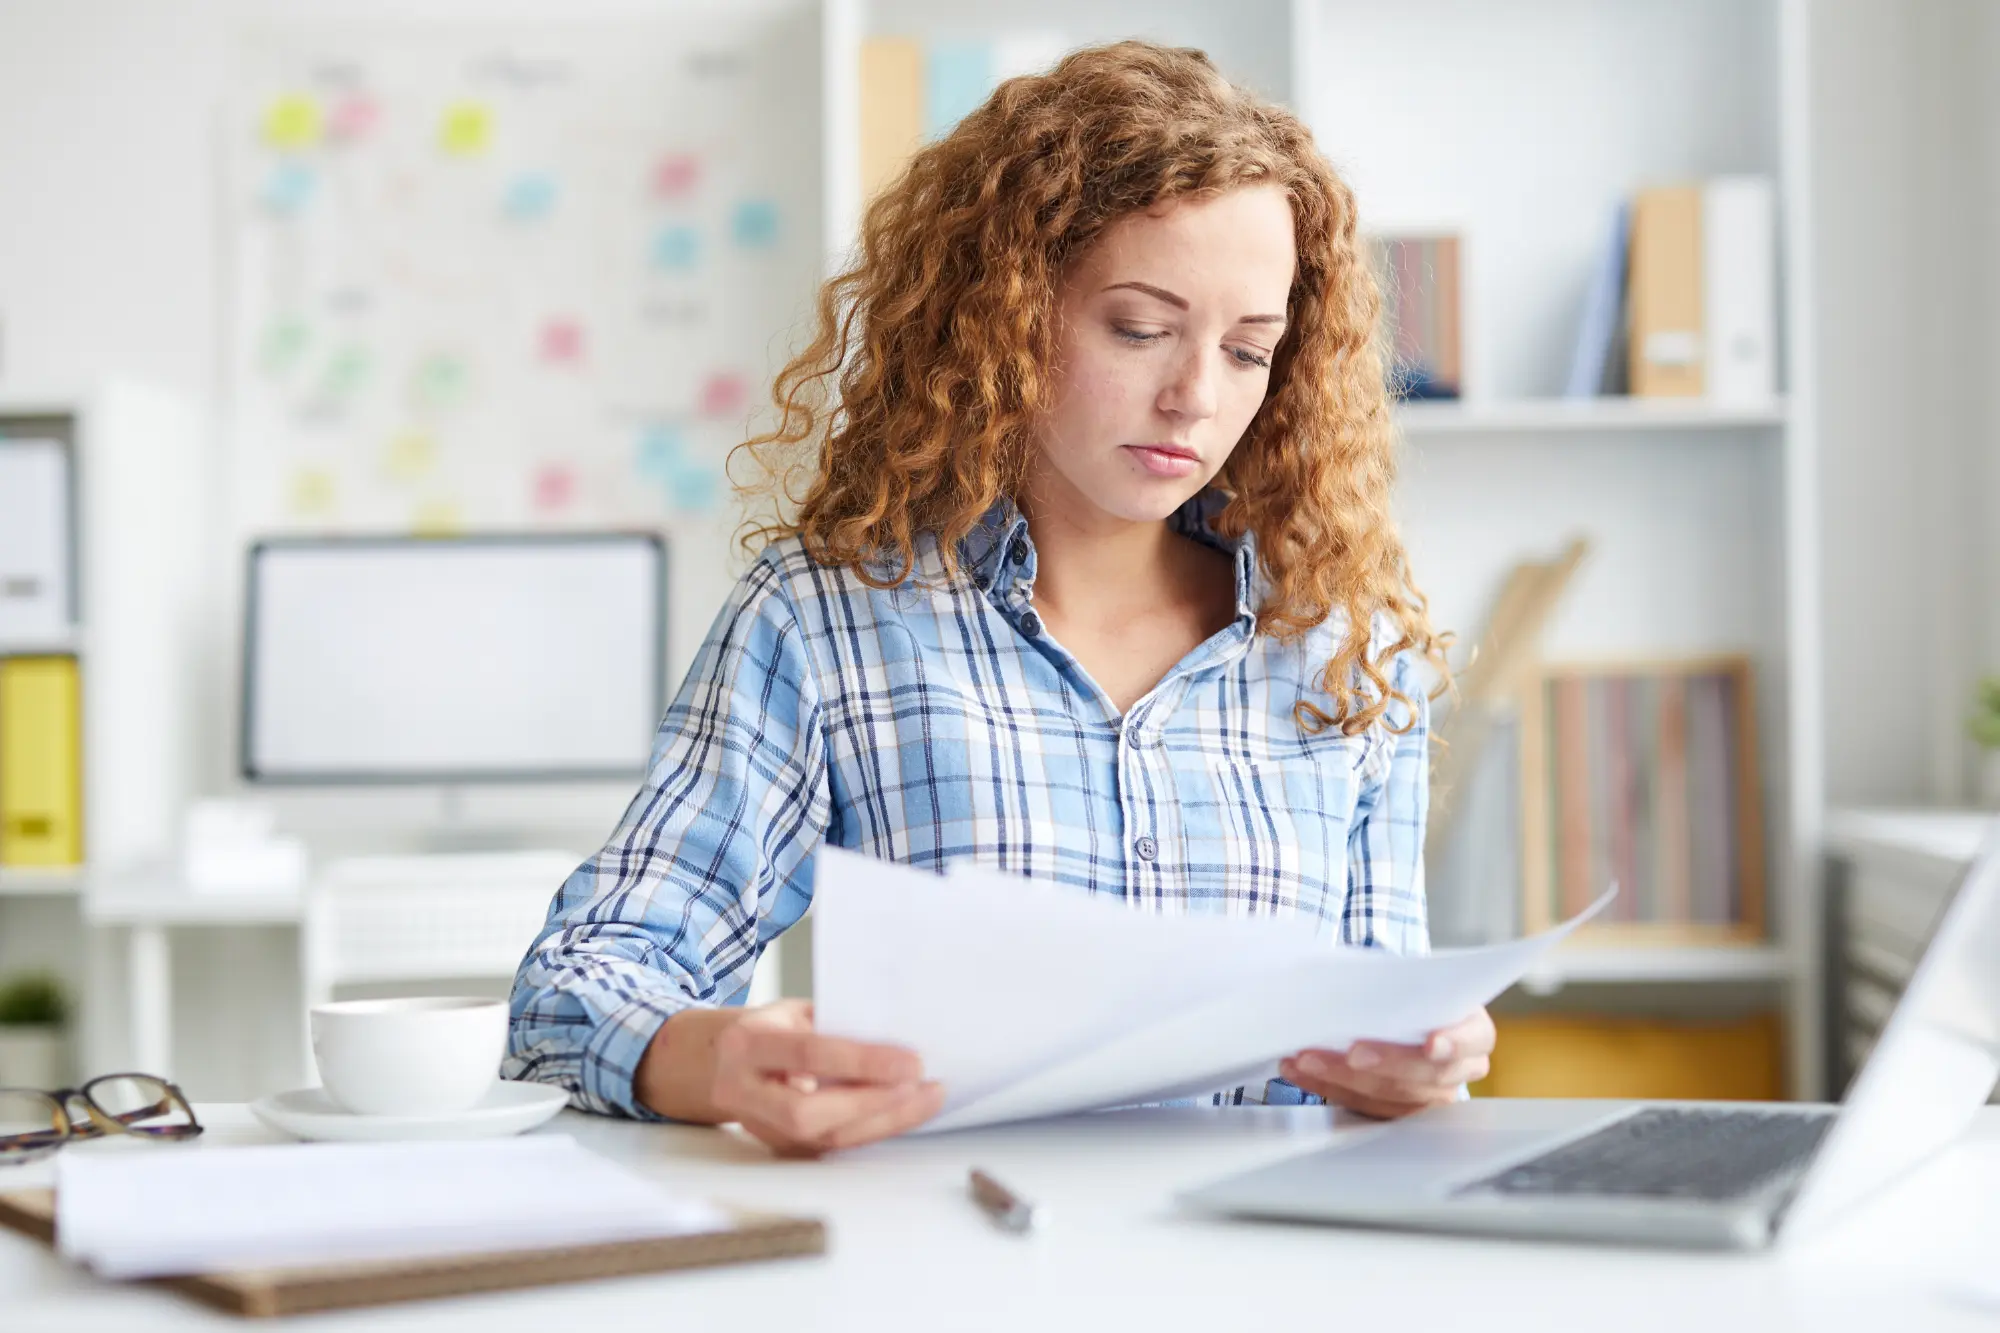 Prepare your financial documents before applying for a mortgage as self-employed applicant